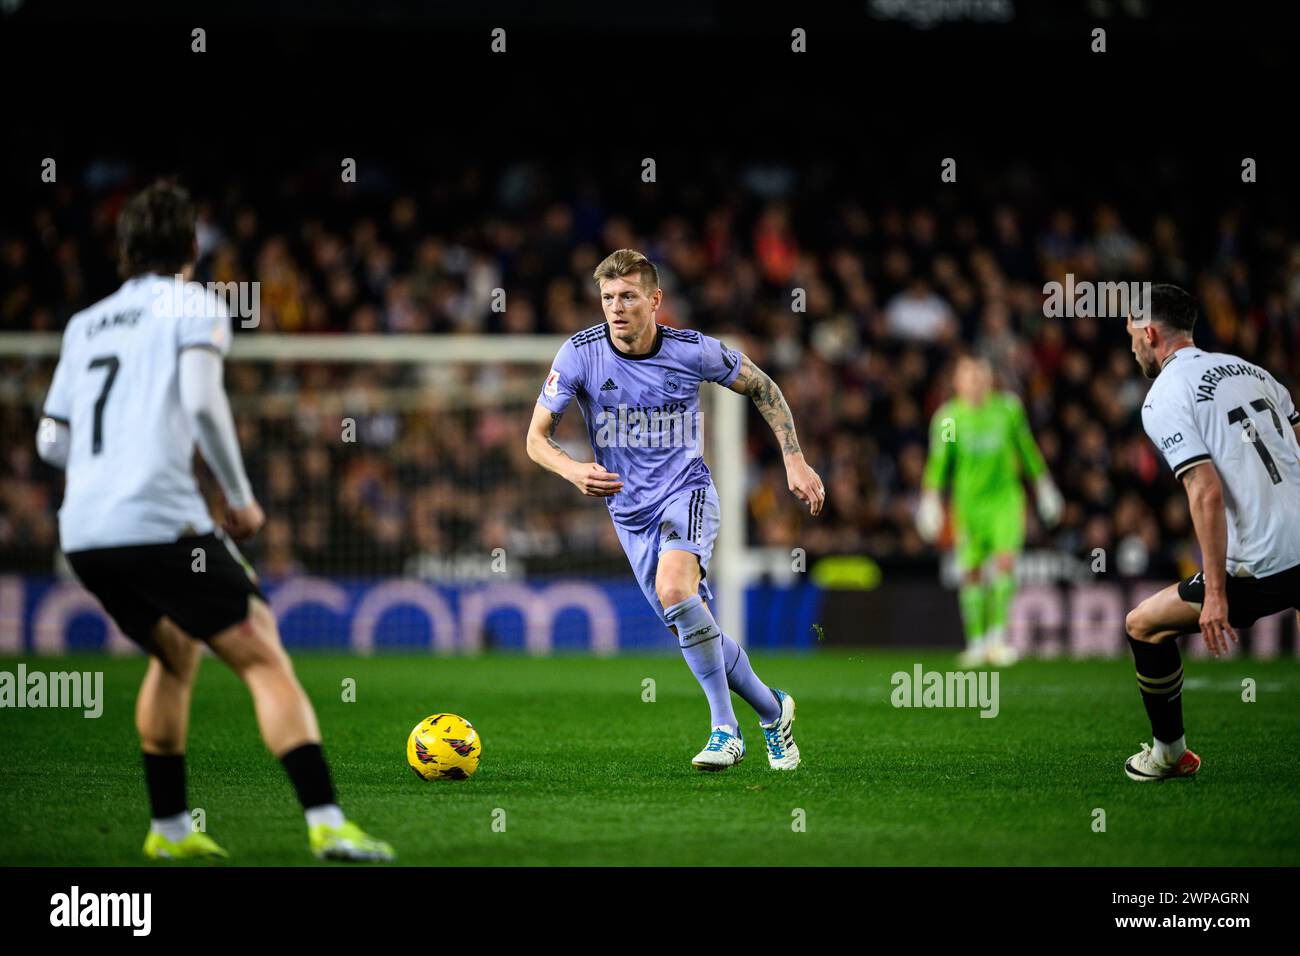 Real Madrid's German player Toni Kroos in action during an EA Sports LaLiga match at Mestalla, Valencia, Spain. Stock Photo